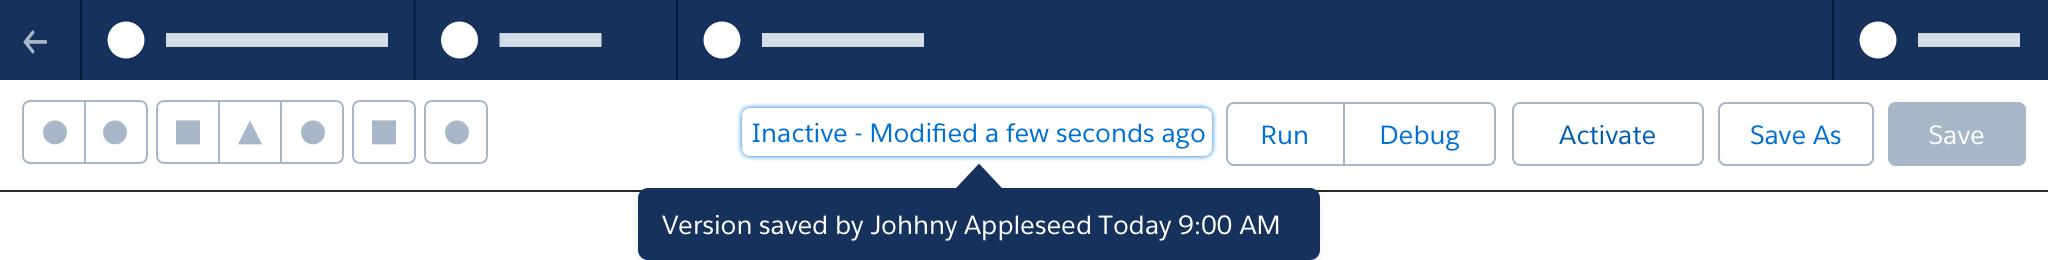 A wireframe showing a tooltip communicating additional details about status, the tooltip text says "Version saved by Johnny Appleseed Today 9:00 AM."